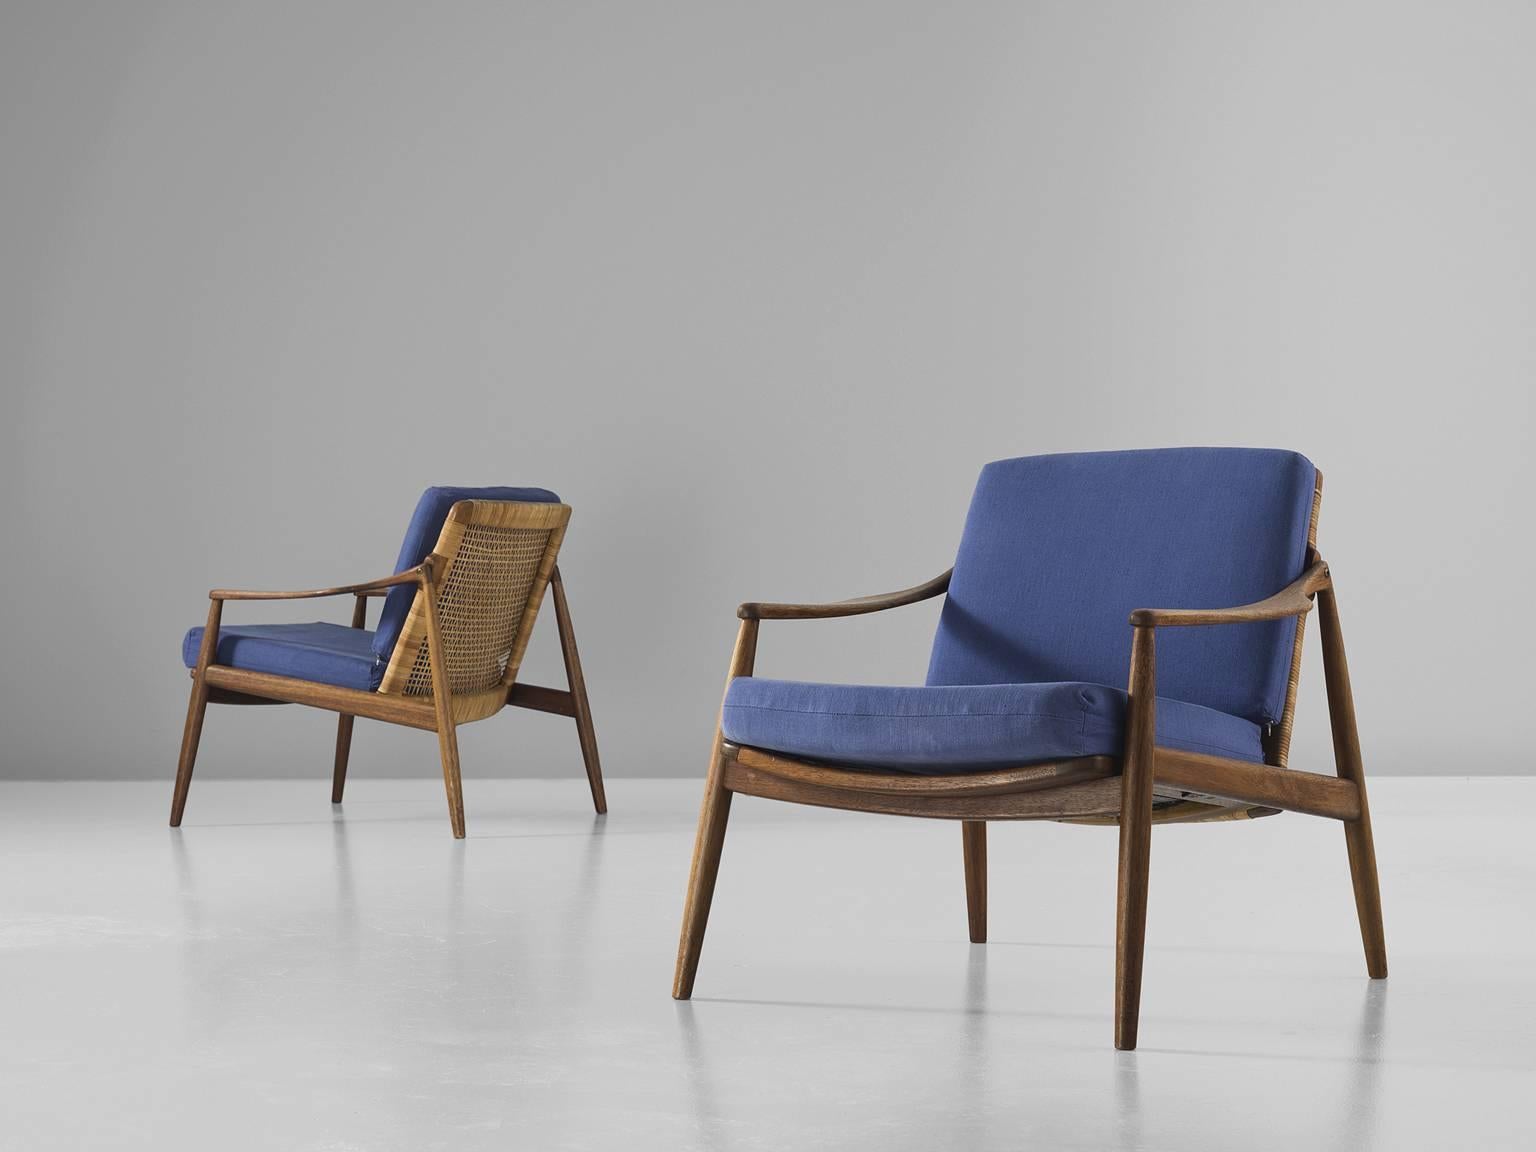 Armchairs, blue fabric, teak and rattan, Hartmut Lohmeyer, manufactured by Wilkhahn, Germany, 1956.

The lounge low armchairs are sensuous and organically shaped. They feature a slightly tilted back and are detailed with tapered legs. The softly